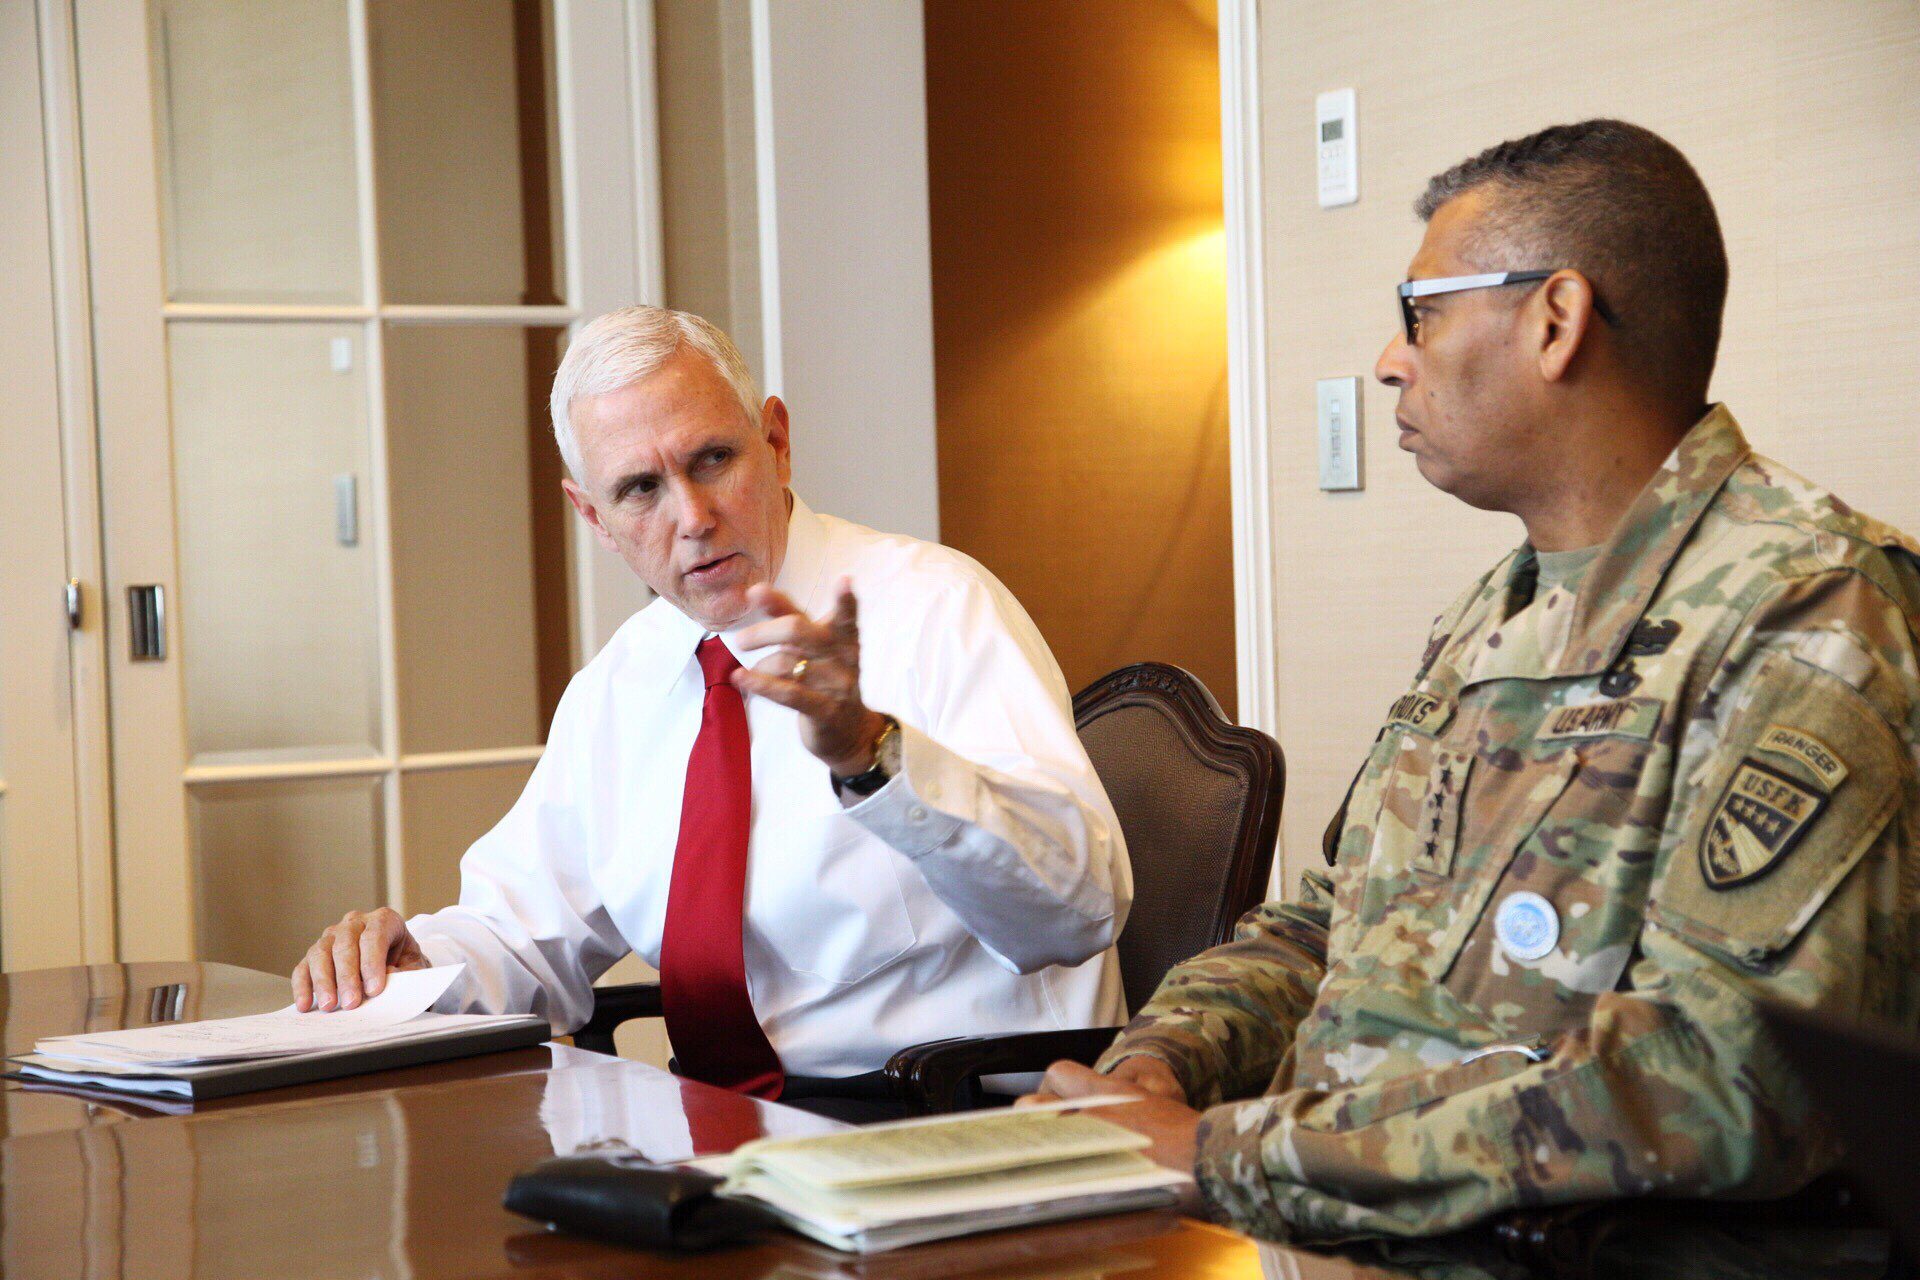 IN SOUTH KOREA. US Vice President Mike Pence (L) in a meeting with US Forces Korea commander Gen. Vincent Brooks, in a photo posted by the US Forces Korea on Twitter, April 17, 2017. Photo courtesy US Forces Korea/Twitter 